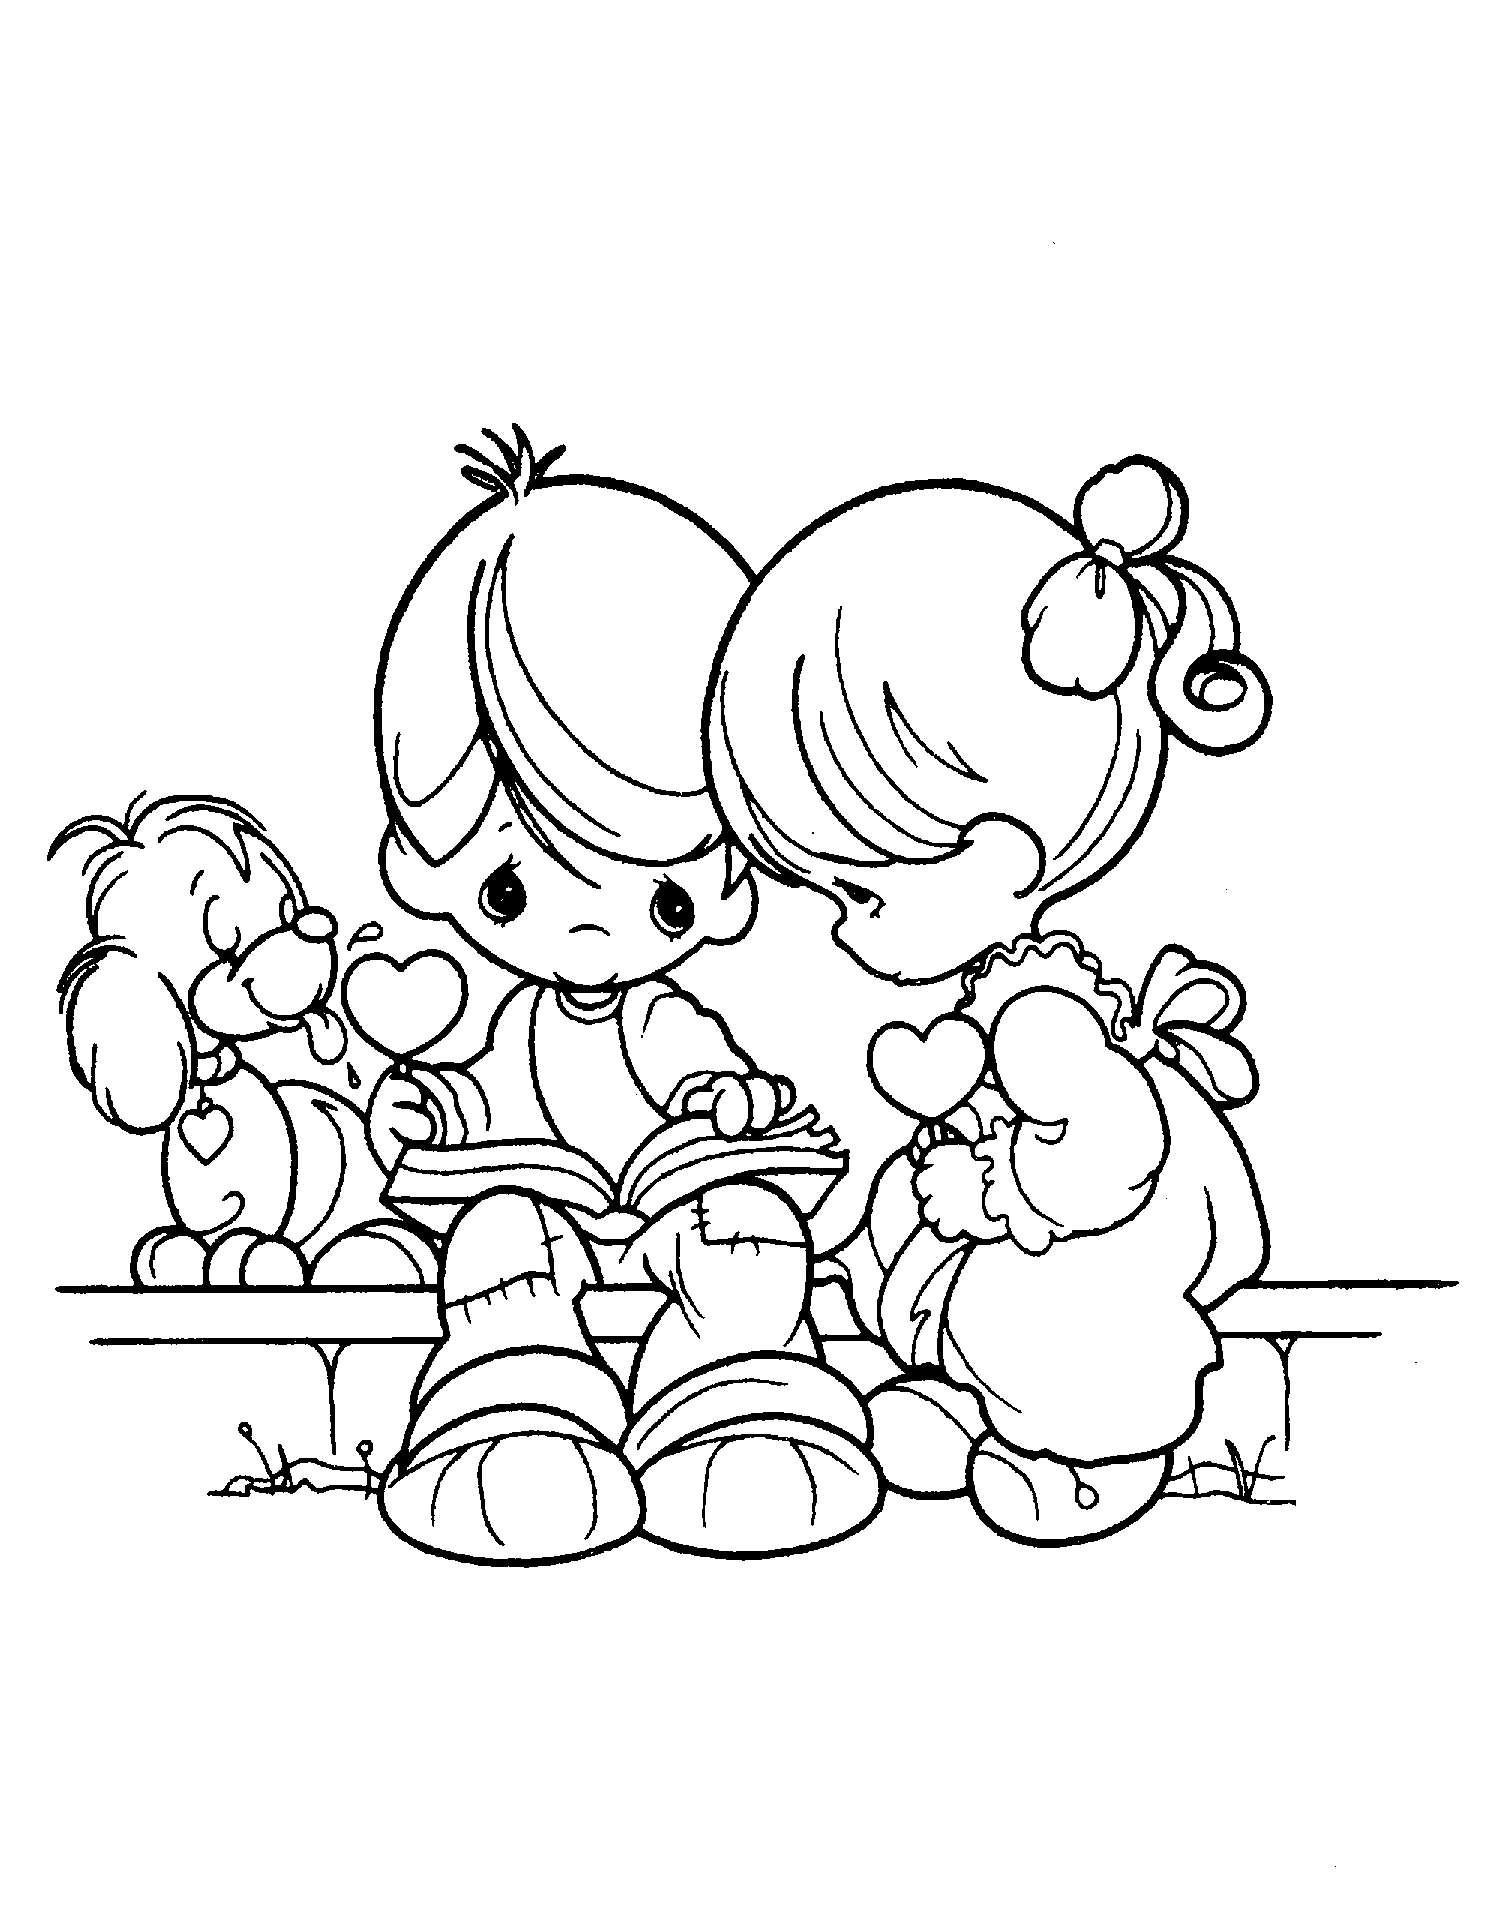 Download Free Printable Precious Moments Coloring Pages For Kids